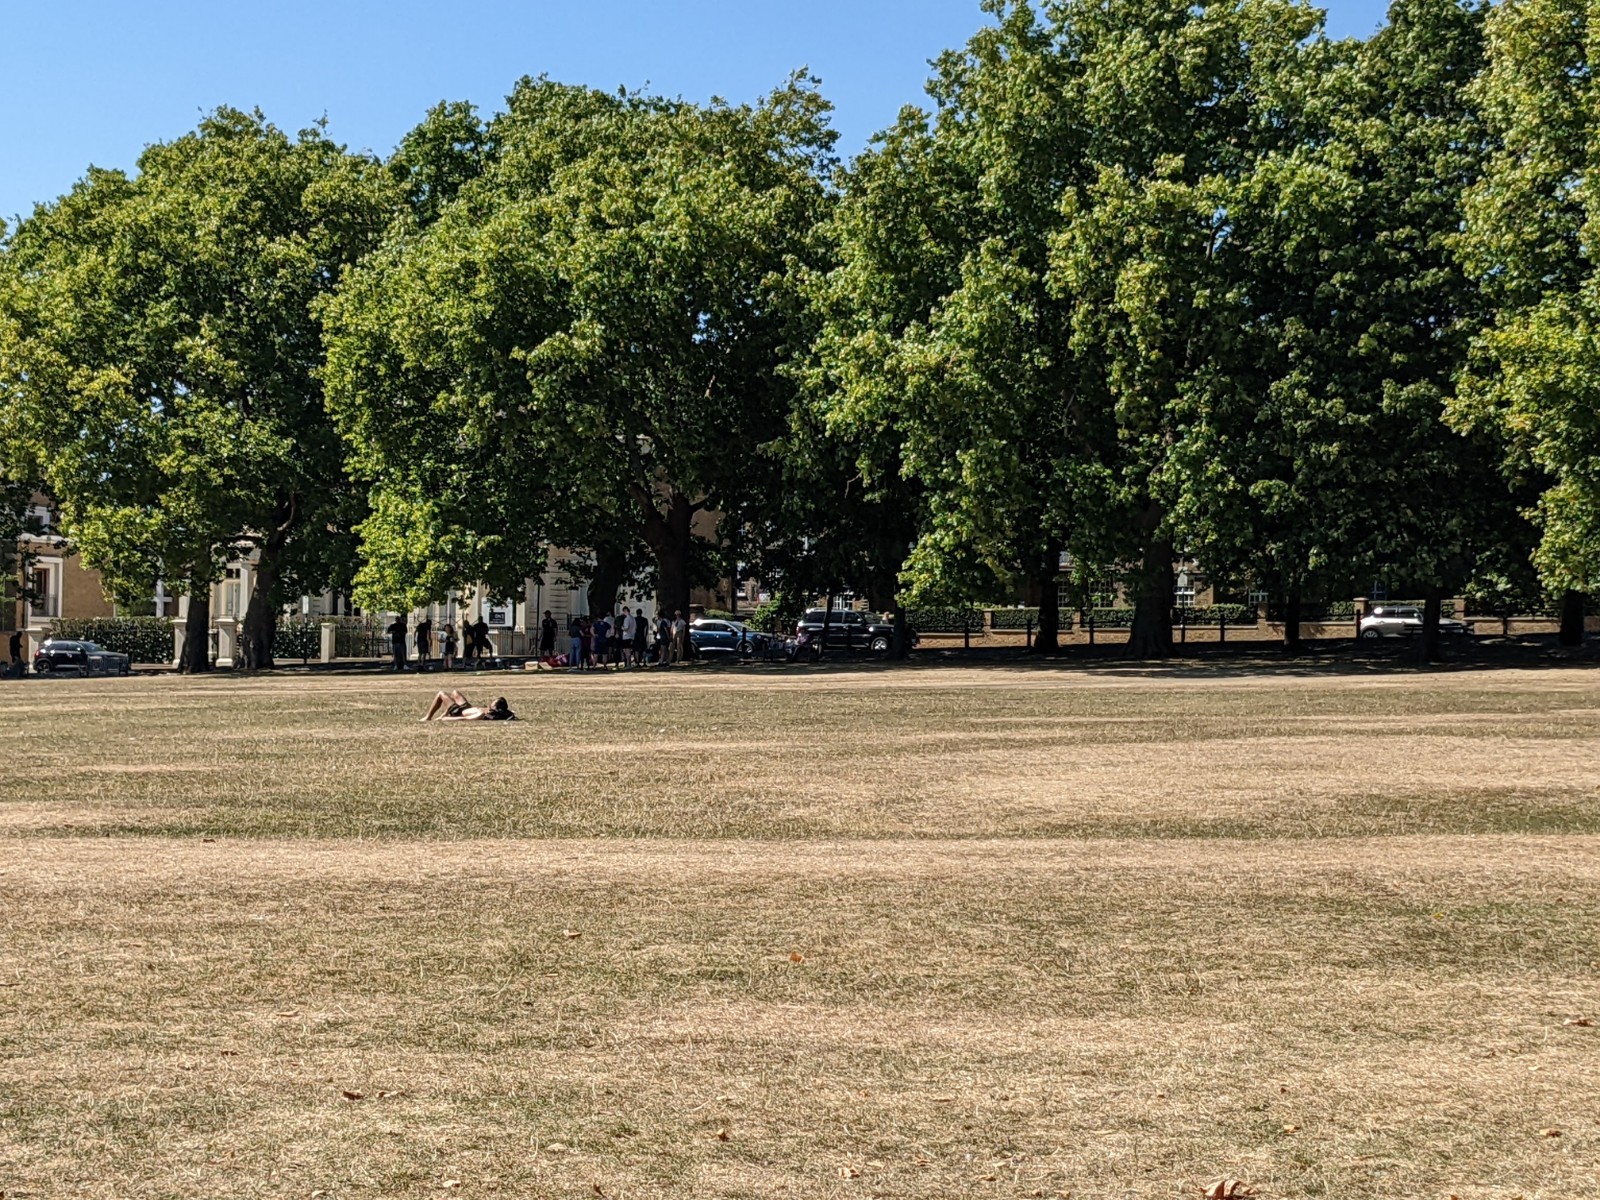 Tinder box dry grass in Highbury Fields , August 2022 pic Julia Gregory, free for use by partners of BBC new wire service